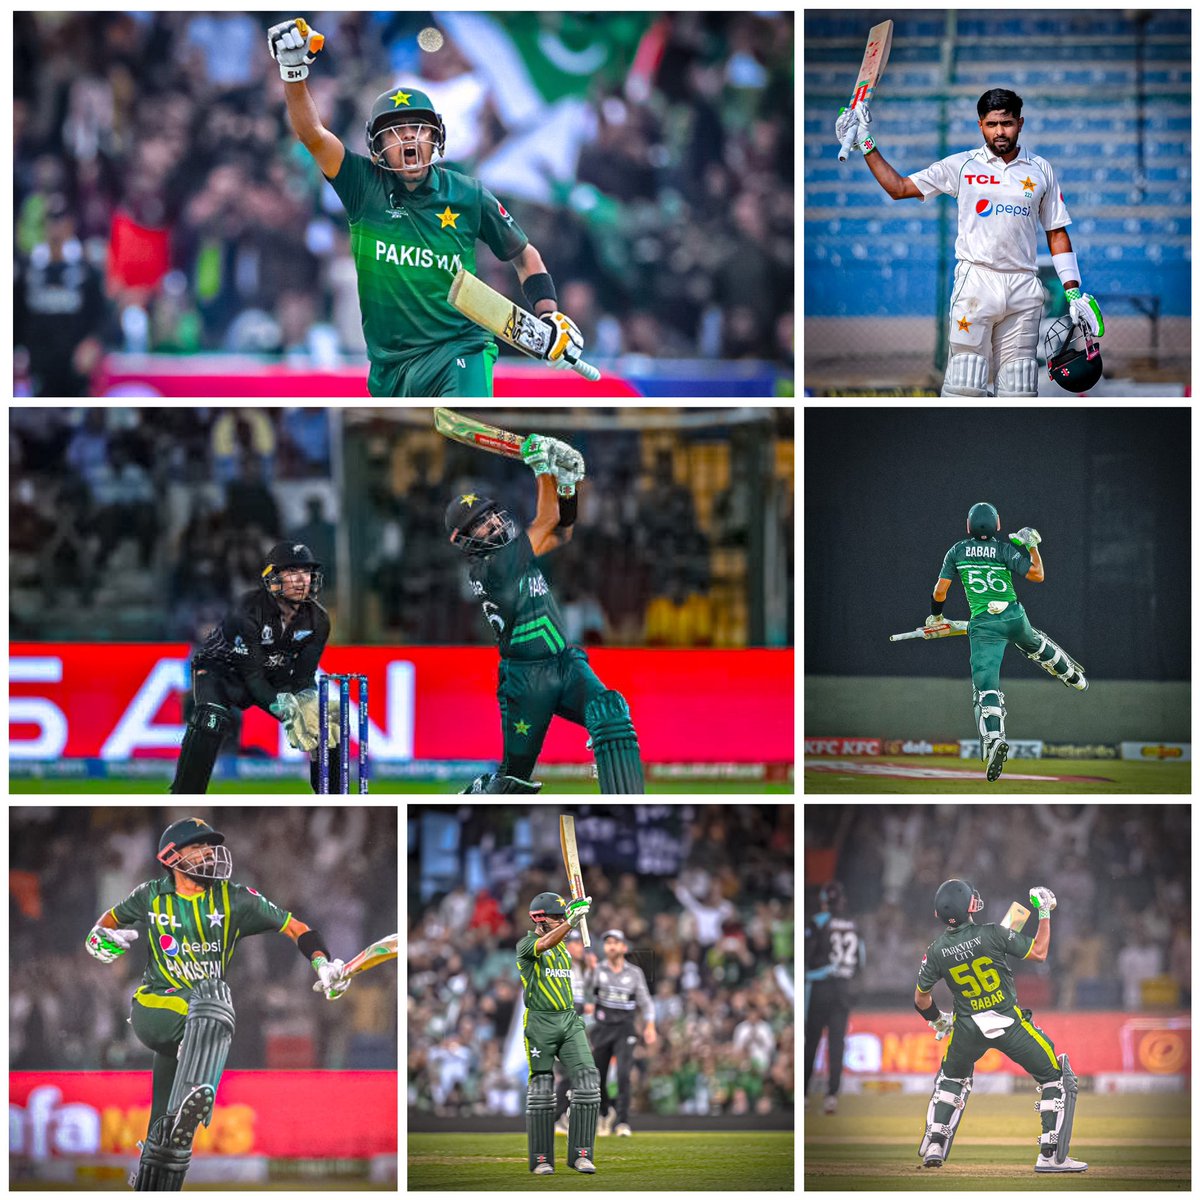 You keep barking about C and D teams. We own New Zealand A Team.🤫🥵 #BabarAzam𓃵 | #PAKvsNZ